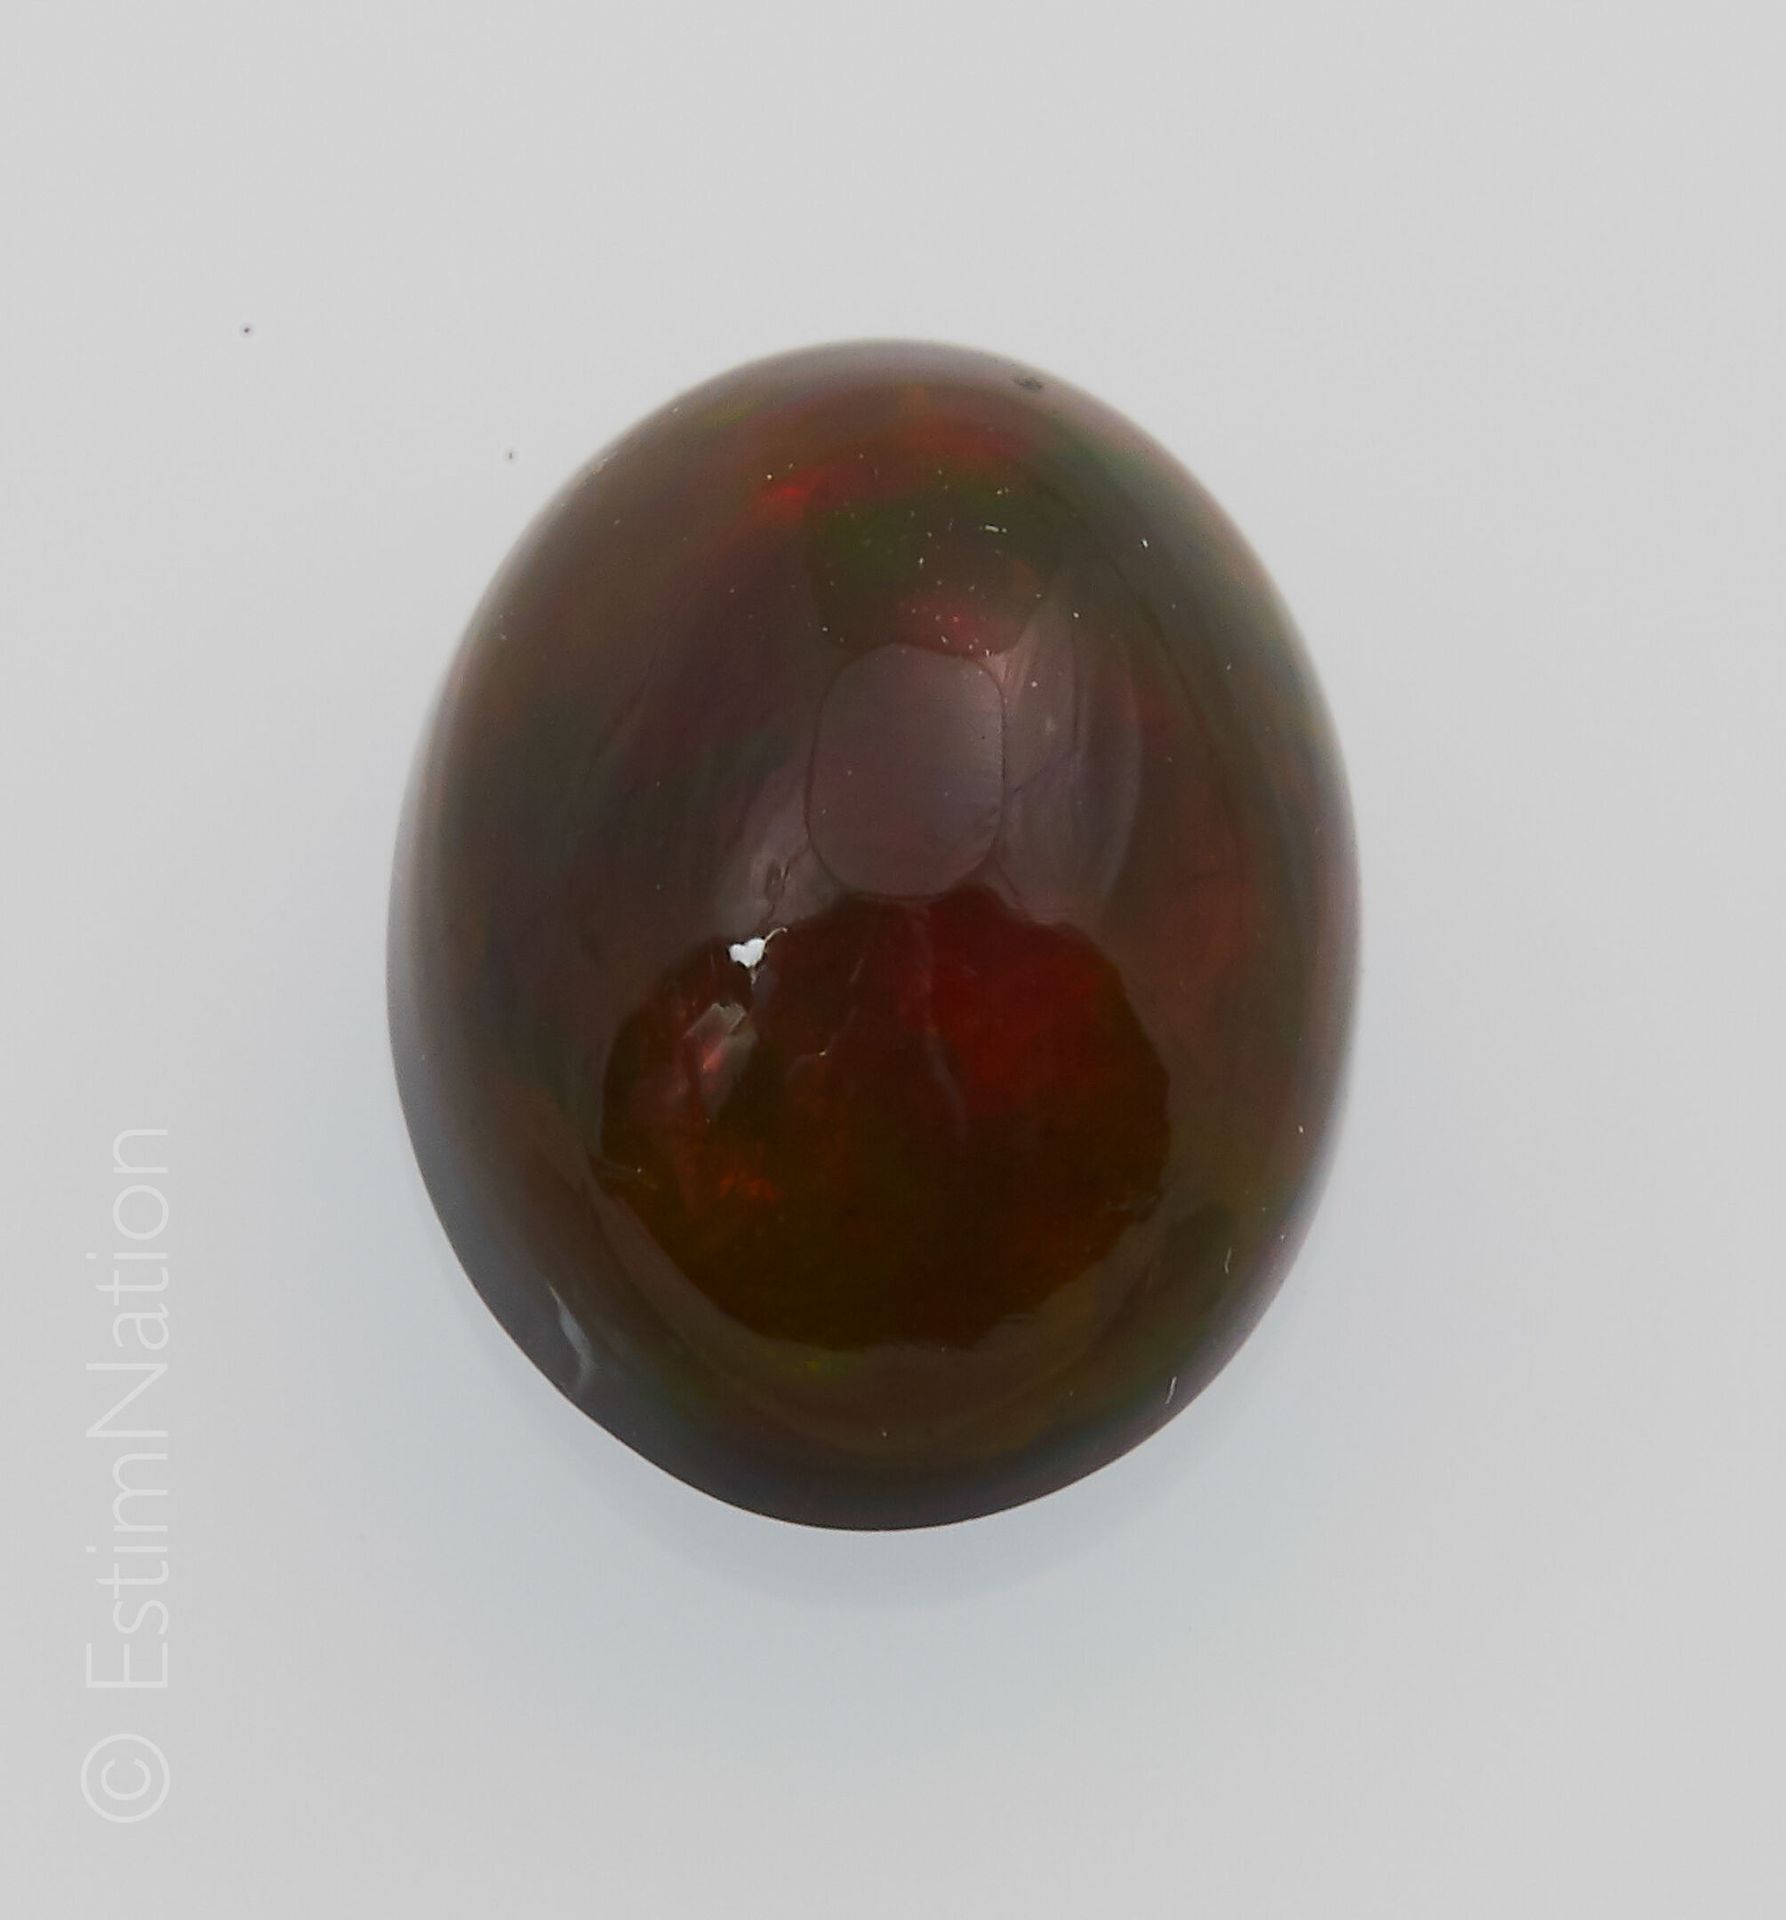 OPALE NOIRE 1.53 CARAT Black oval cabochon opal weighing approximately 1.53 ct

&hellip;